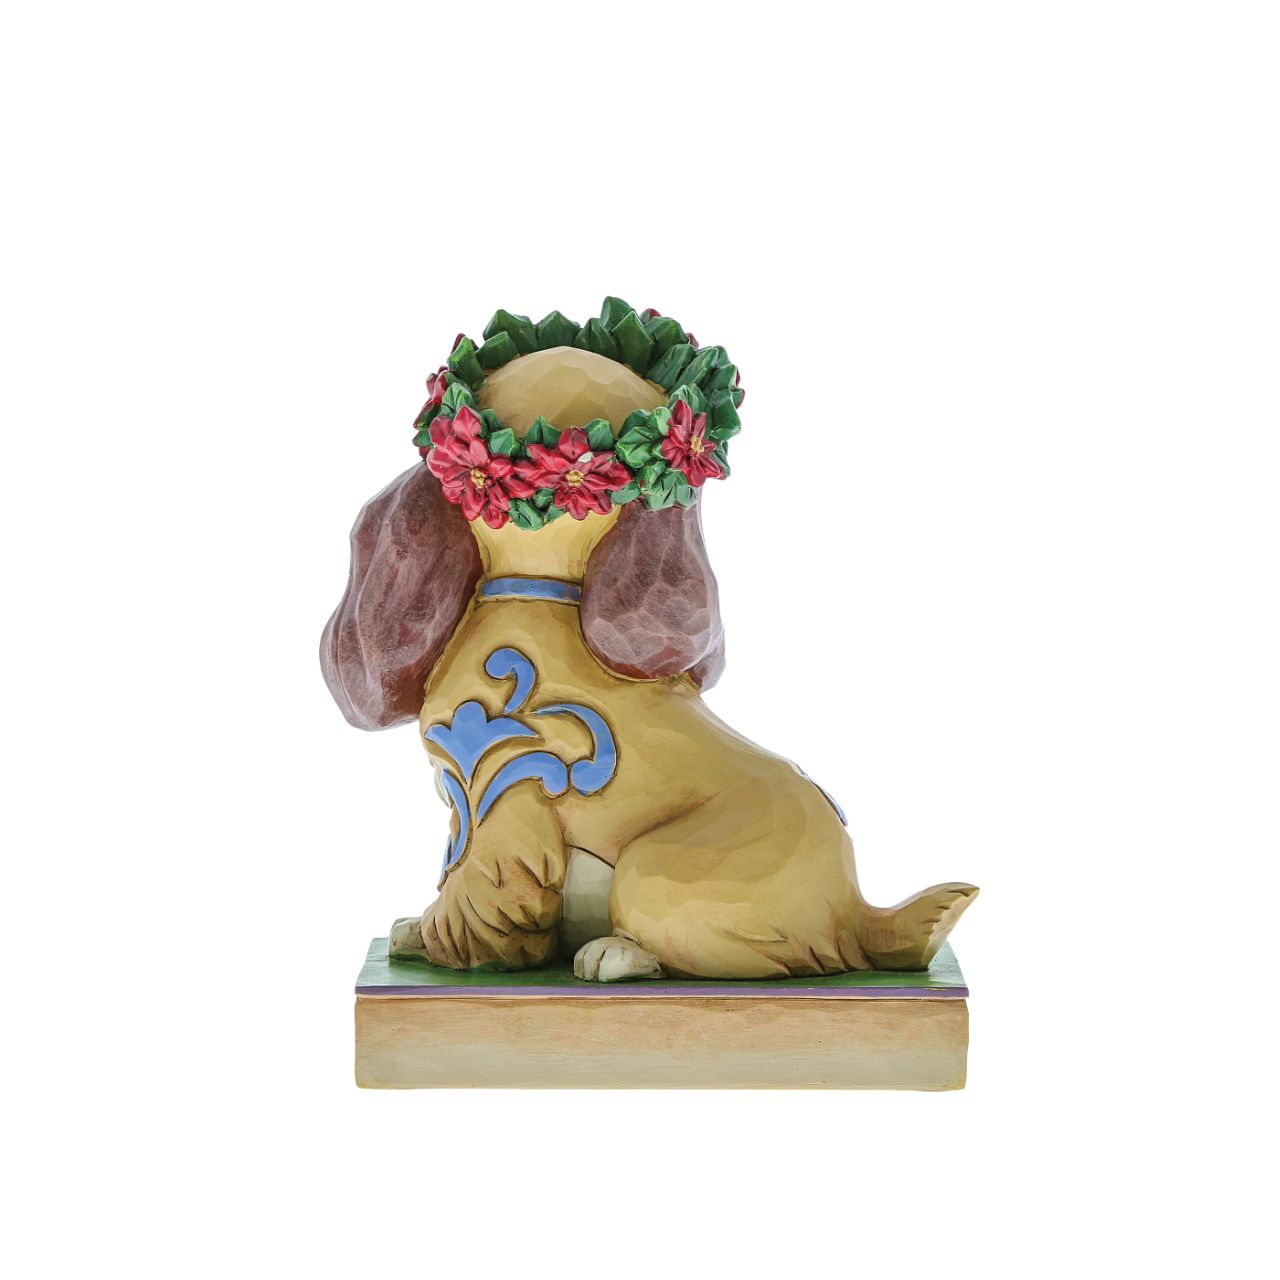 Jim Shore Christmas Lady Personality Pose Figurine  Lady, the regal Cocker Spaniel, wears a crown of holly in this lovely relief by Jim Shore. Her classic blue collar is matched by gorgeous rosemaling running down her coat.